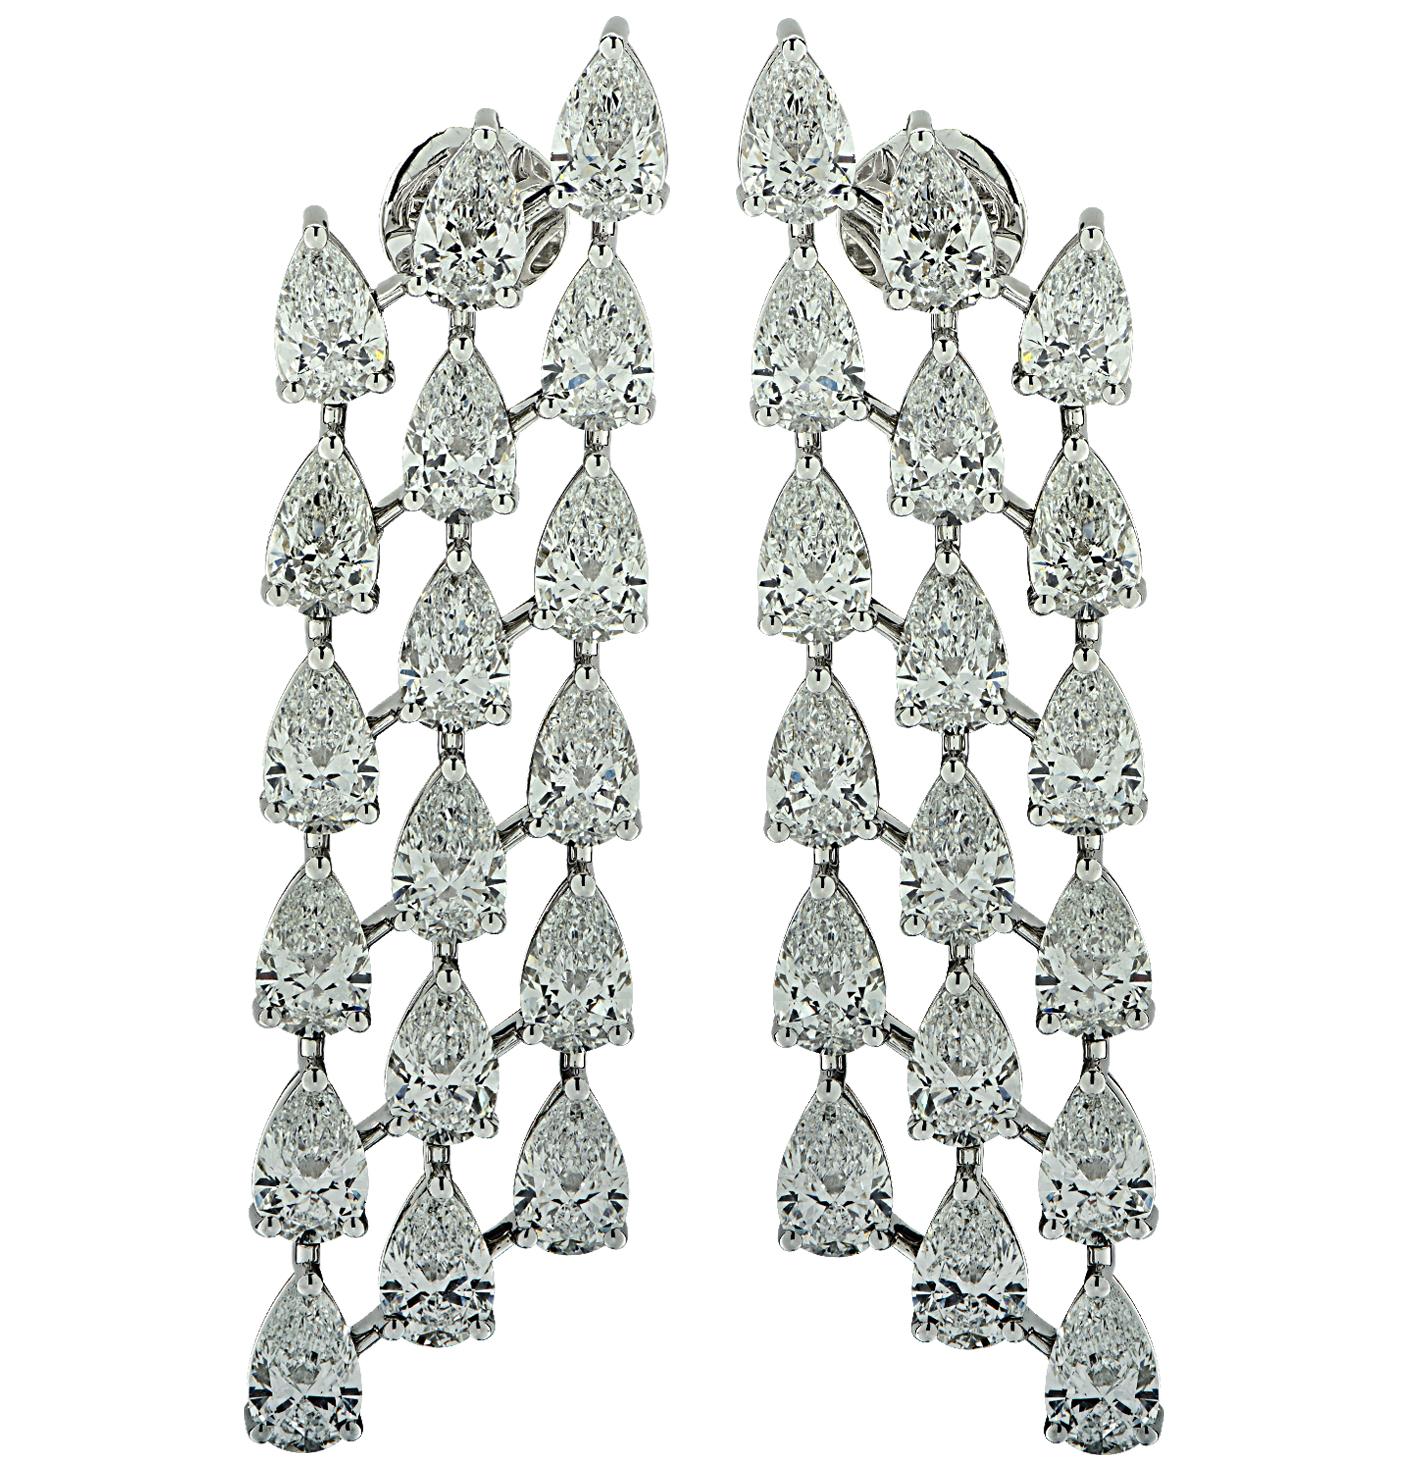 Sensational Vivid Diamonds Dangle Earrings finely crafted by hand in platinum, featuring 36 GIA Certified Pear shape diamonds weighing 14.50 carats total, D-F color, SI1 clarity. Each spectacular diamond was carefully selected, perfectly matched and